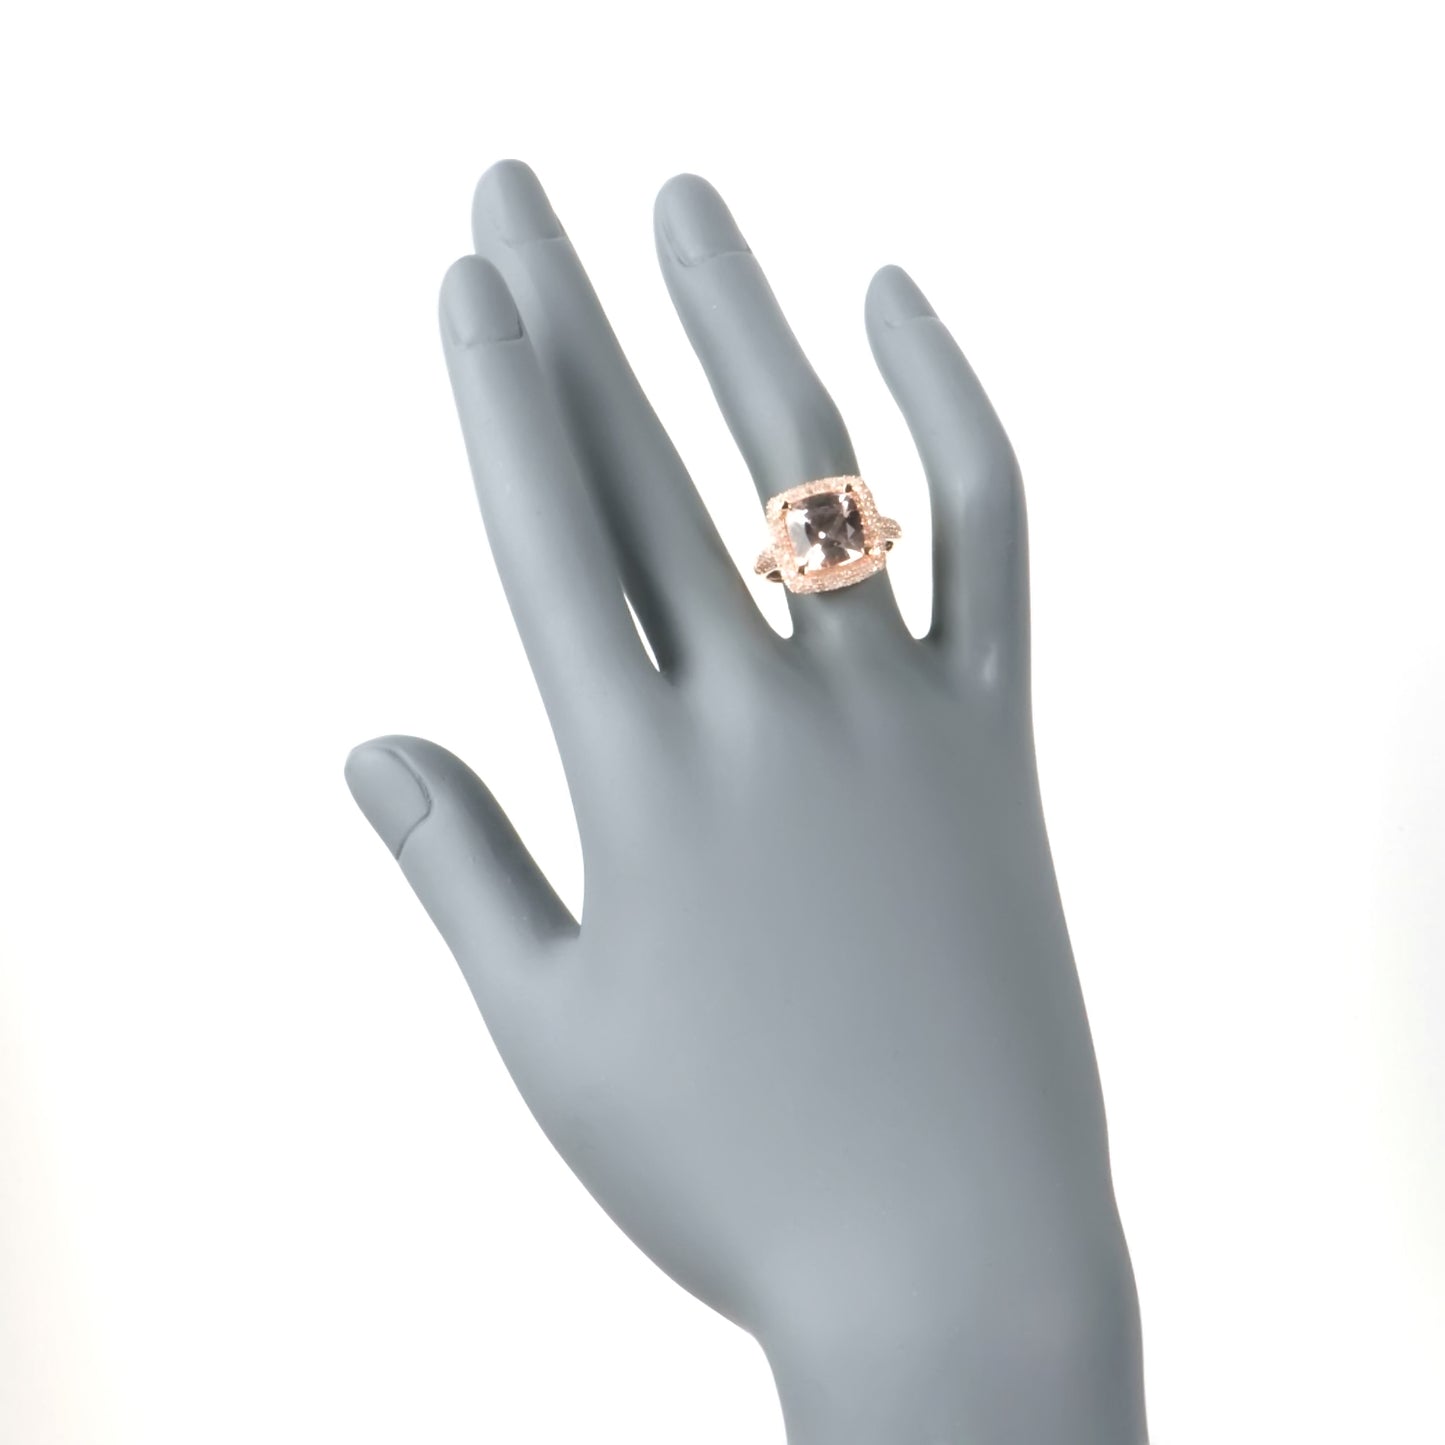 14kt Rose Gold Morganite and 1/2ct TDW White Diamond Solitaire Cushion Engagement Ring - Pinctore